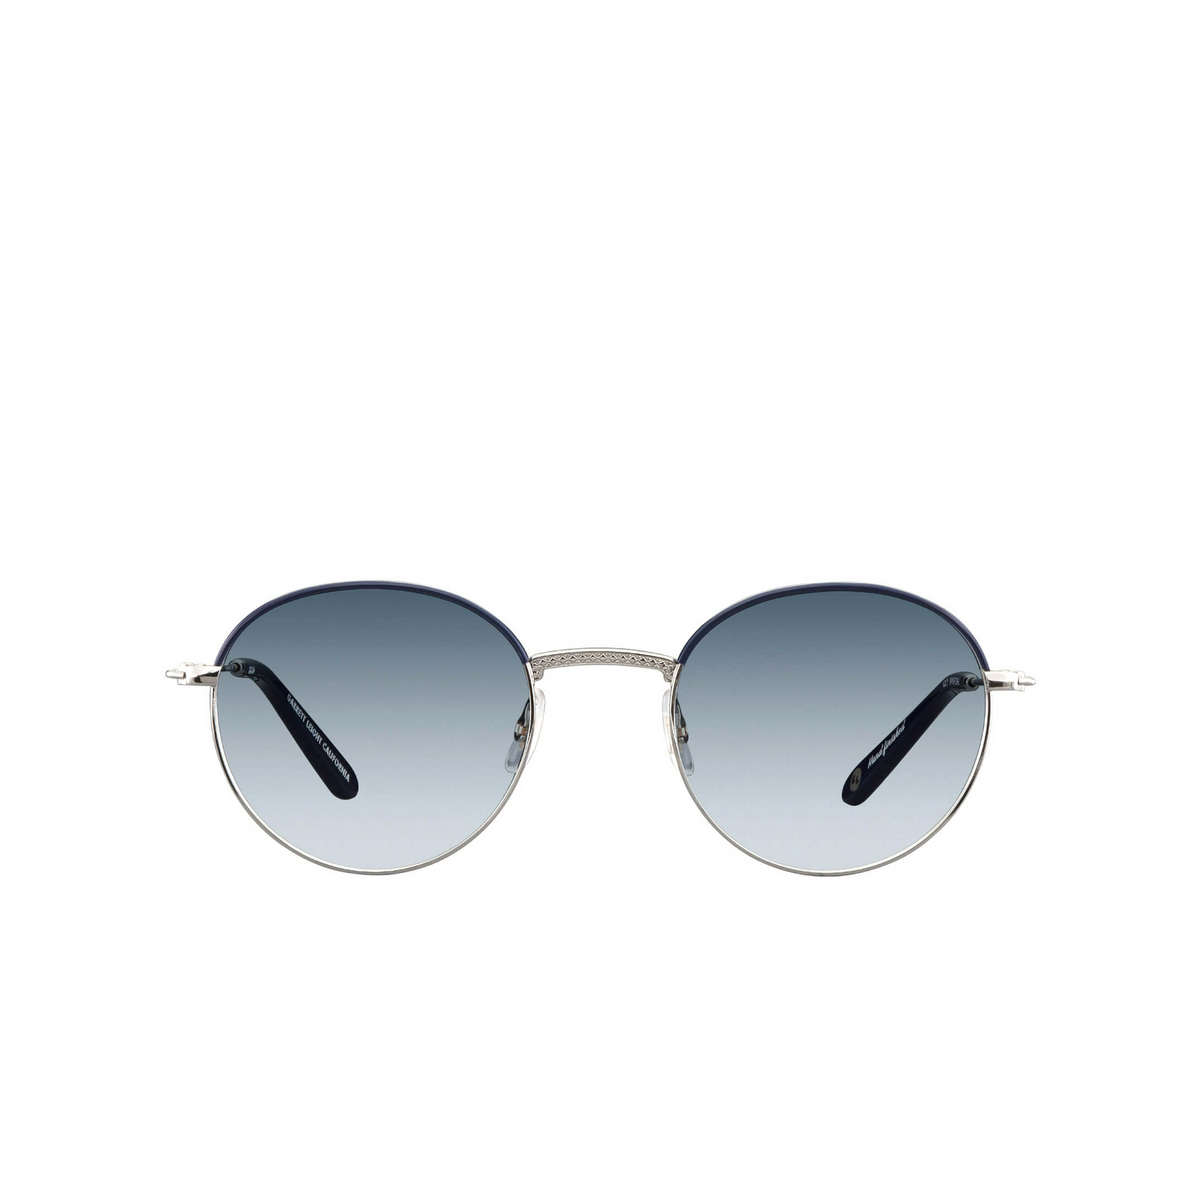 Garrett Leight CLOY Sunglasses NVY-SV/DWG Navy Silver - front view